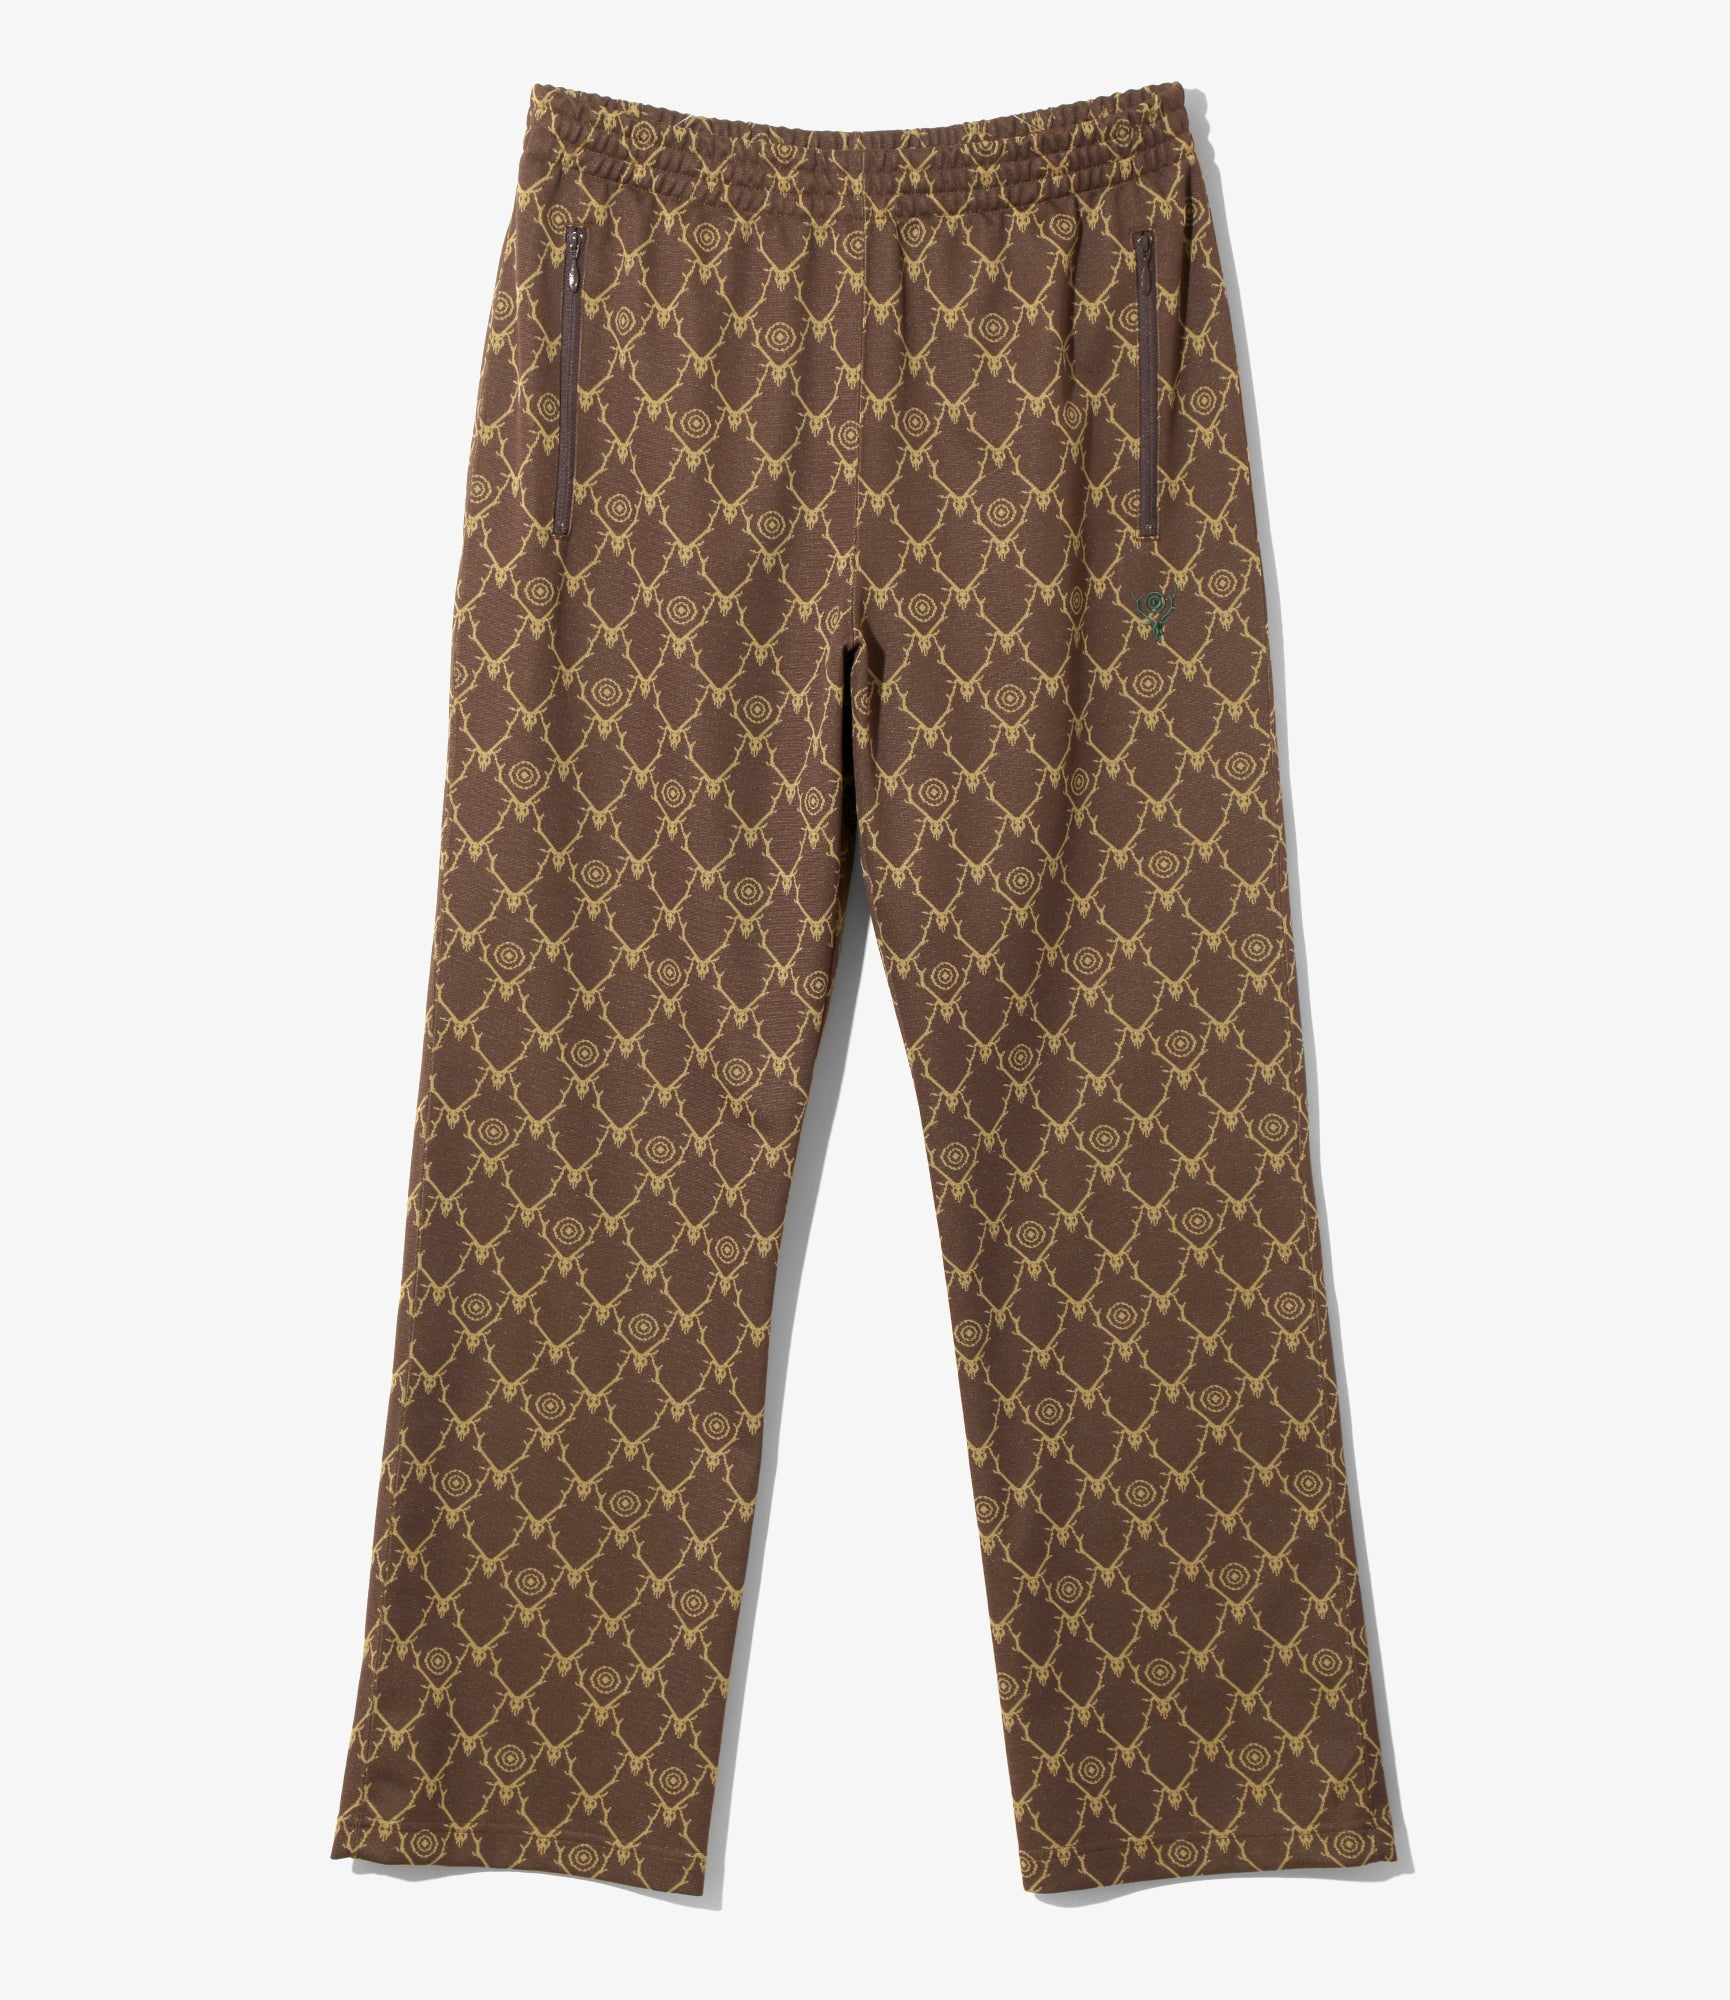 South2 West8 Trainer Pant - Poly Jq / Skull&Target - Brown